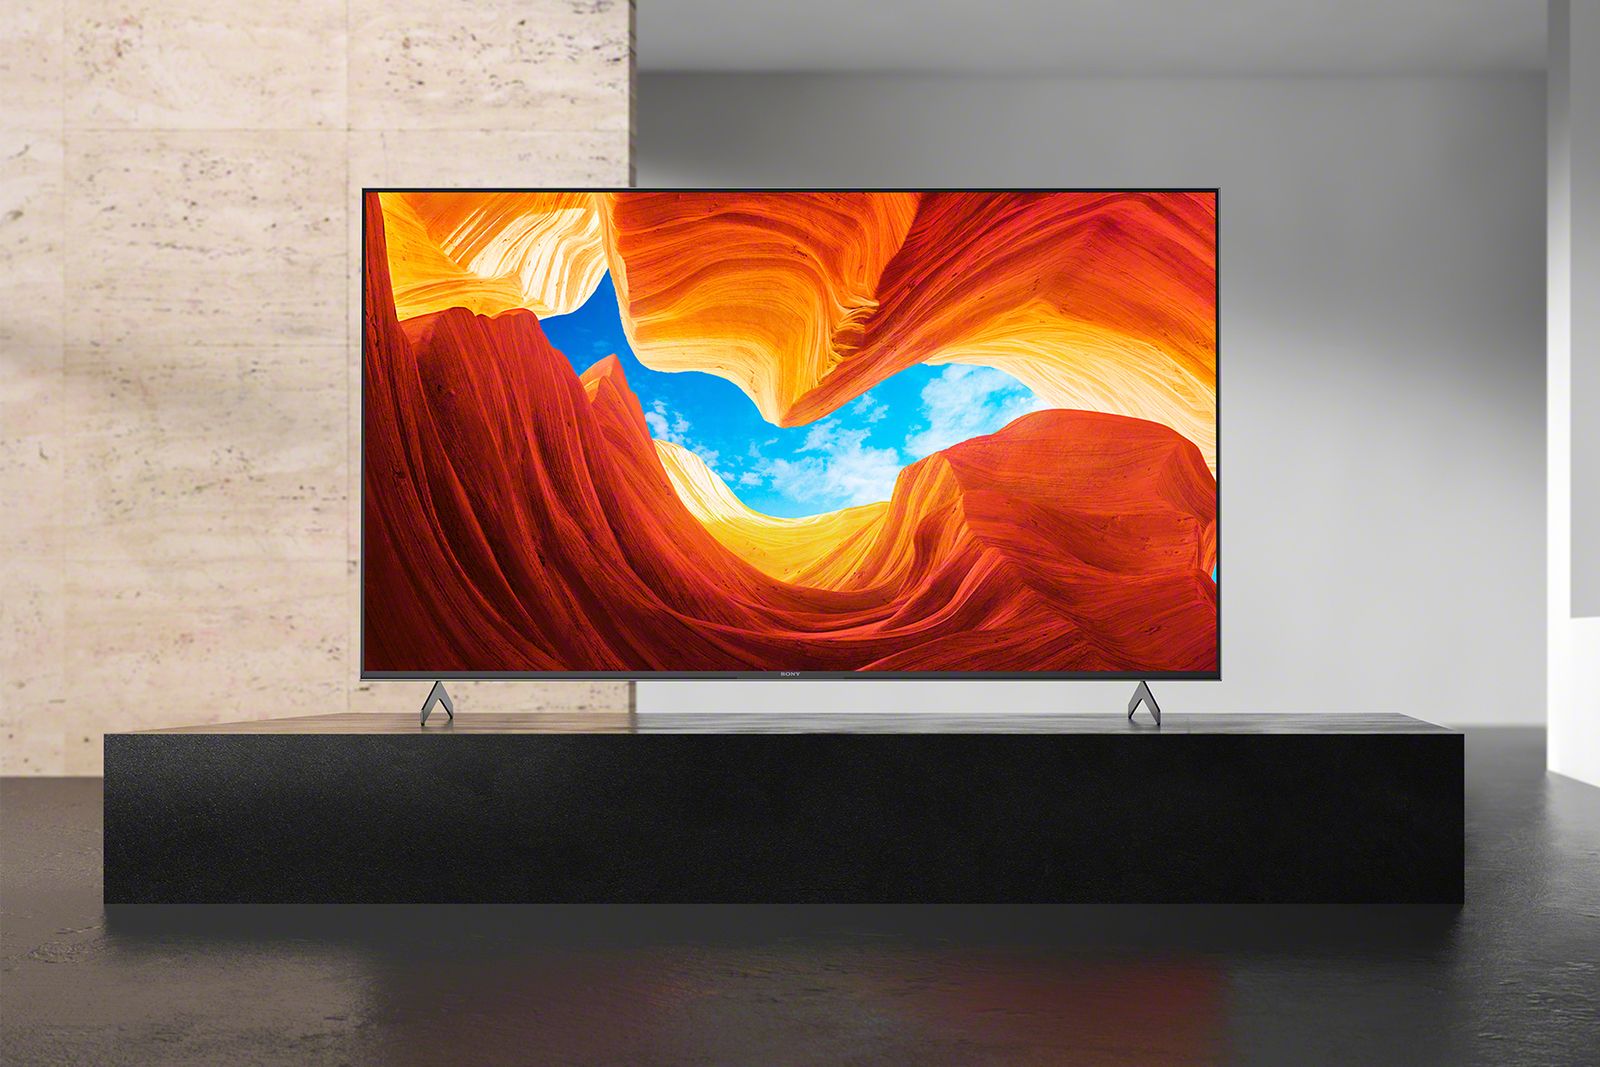 Sony XH90 4K HDR LED TV price and availability revealed image 1